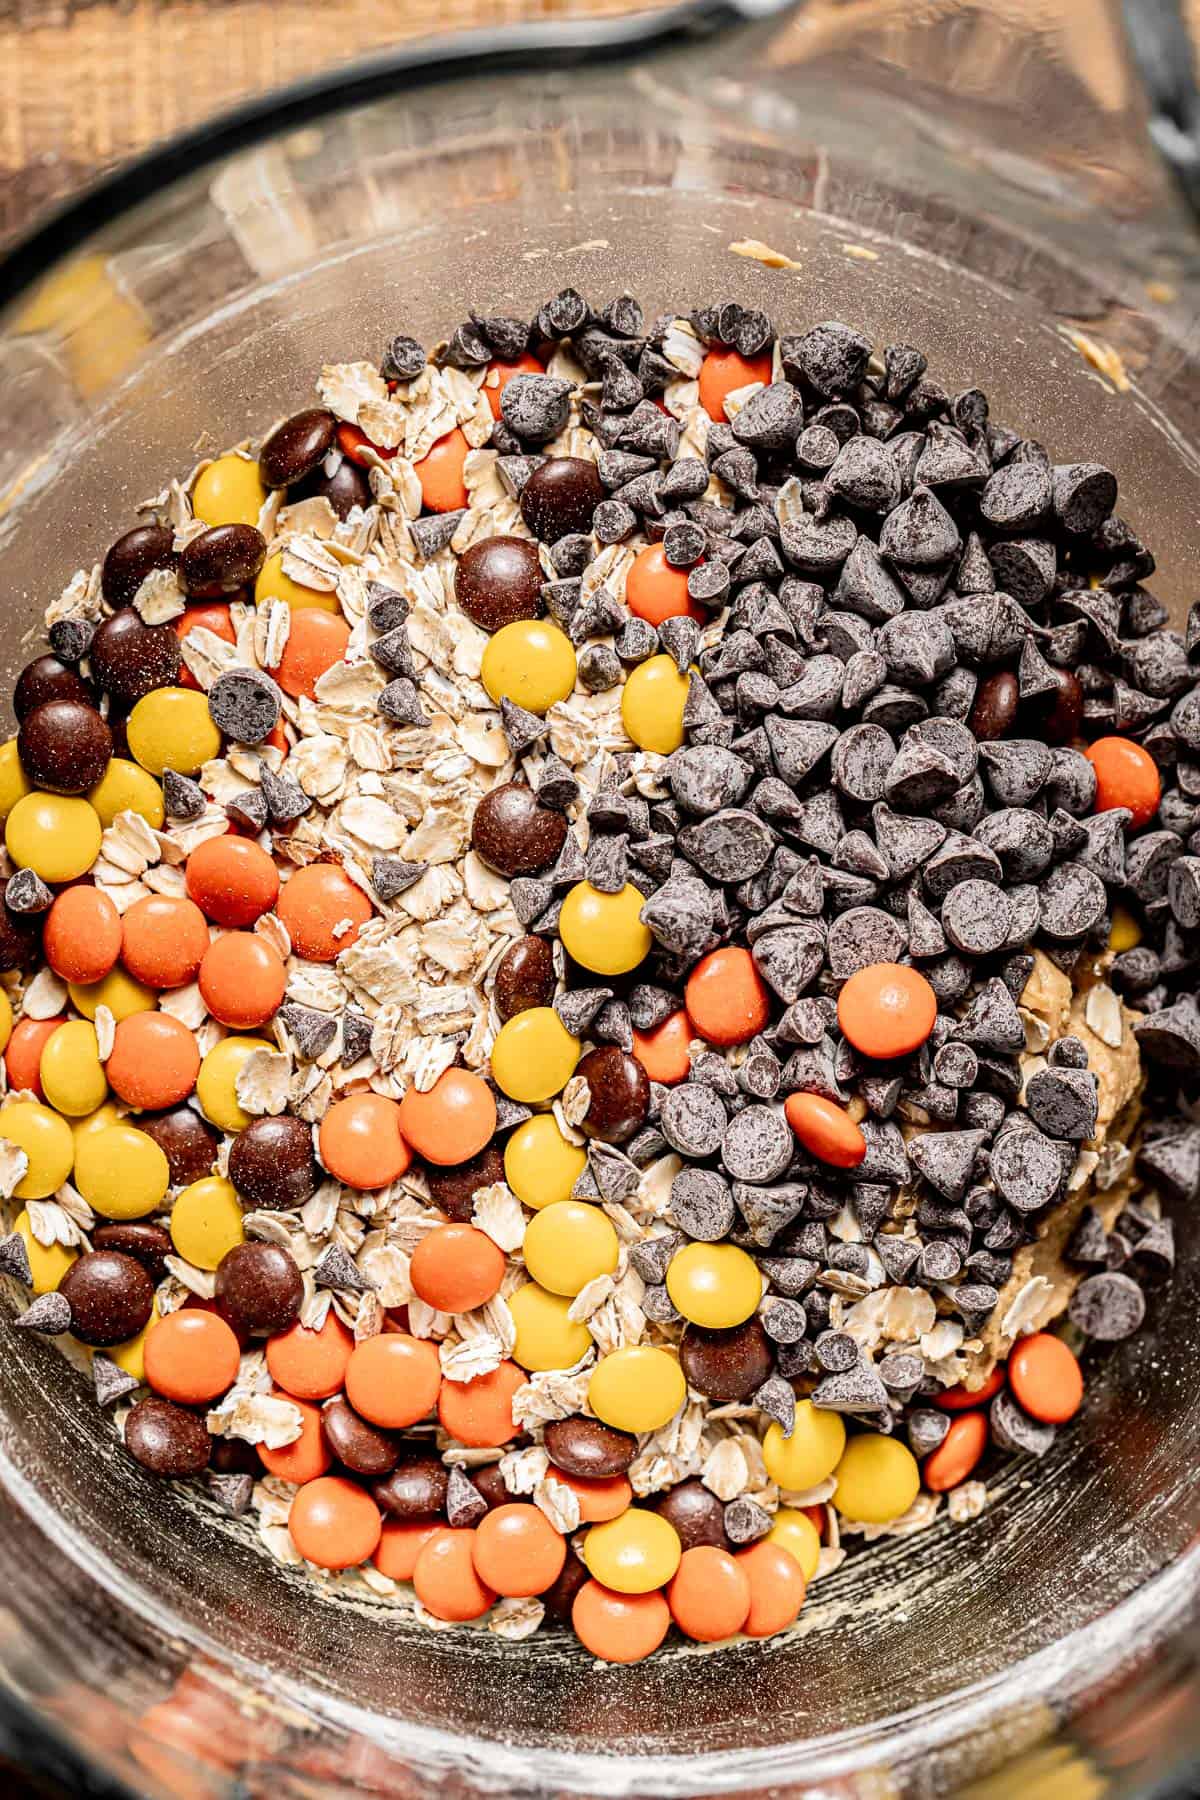 chocolate, Reese's pieces, and oats added to cookie dough in bowl.